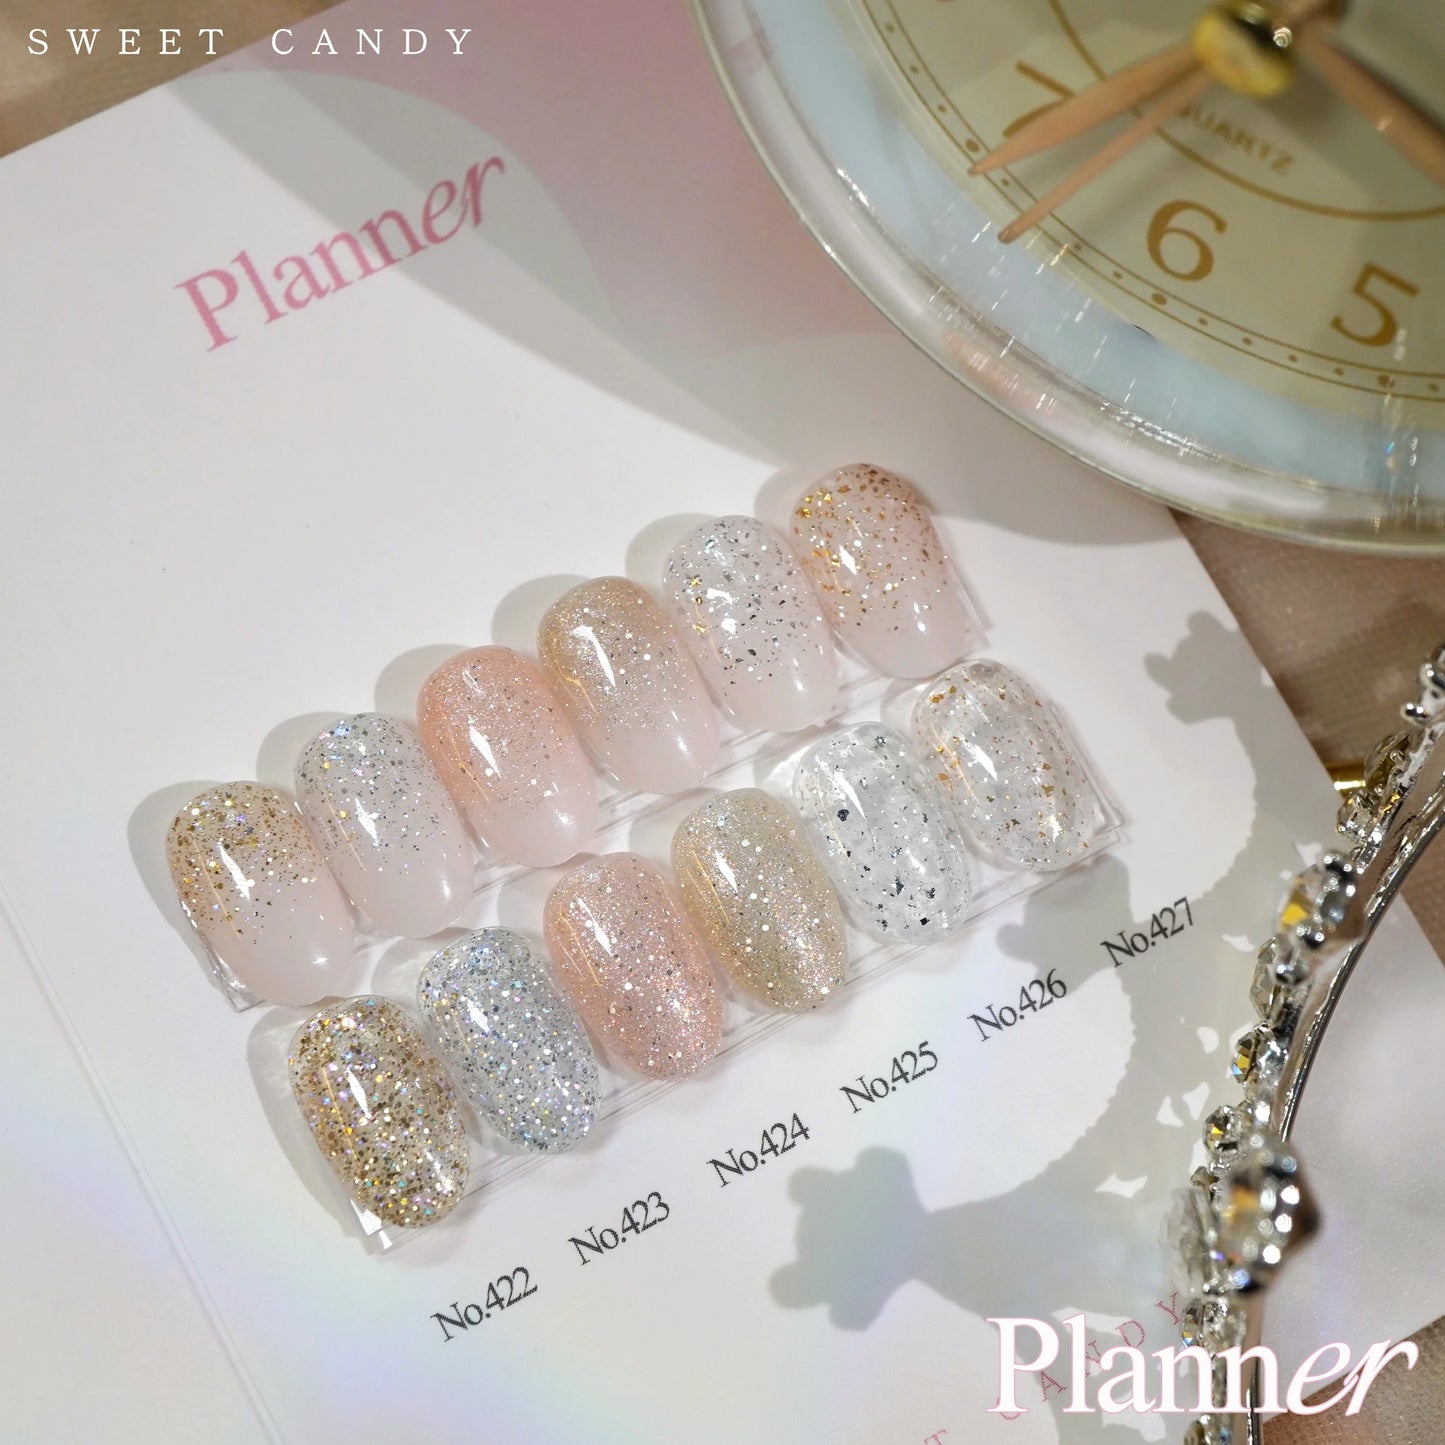 Sweet Candy- Planner